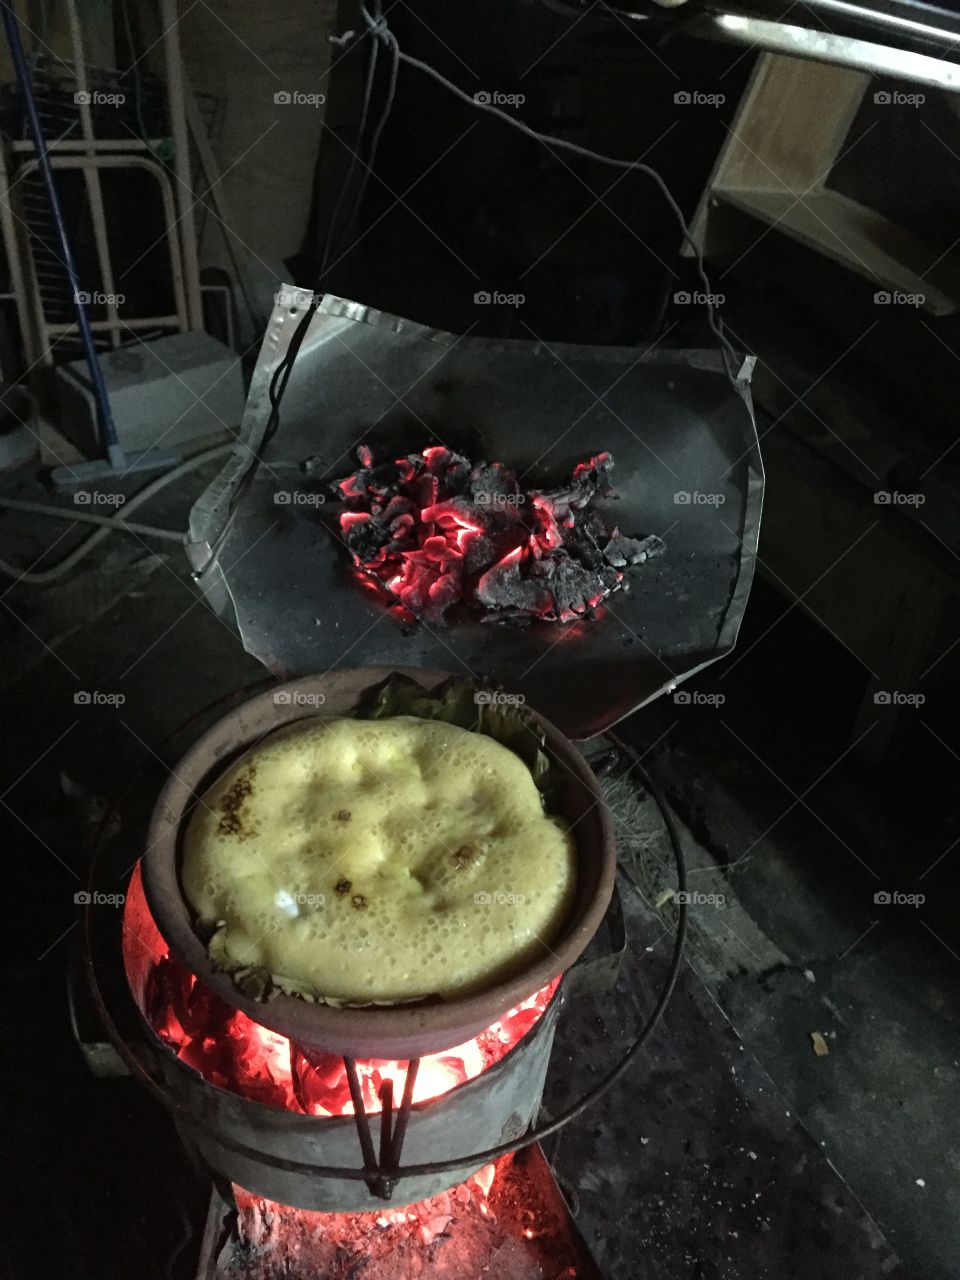 Bibingka. We're invited  to cook a  filipino rice cake. The taste  was enhanced by the traditional clay pot and dried coco shell